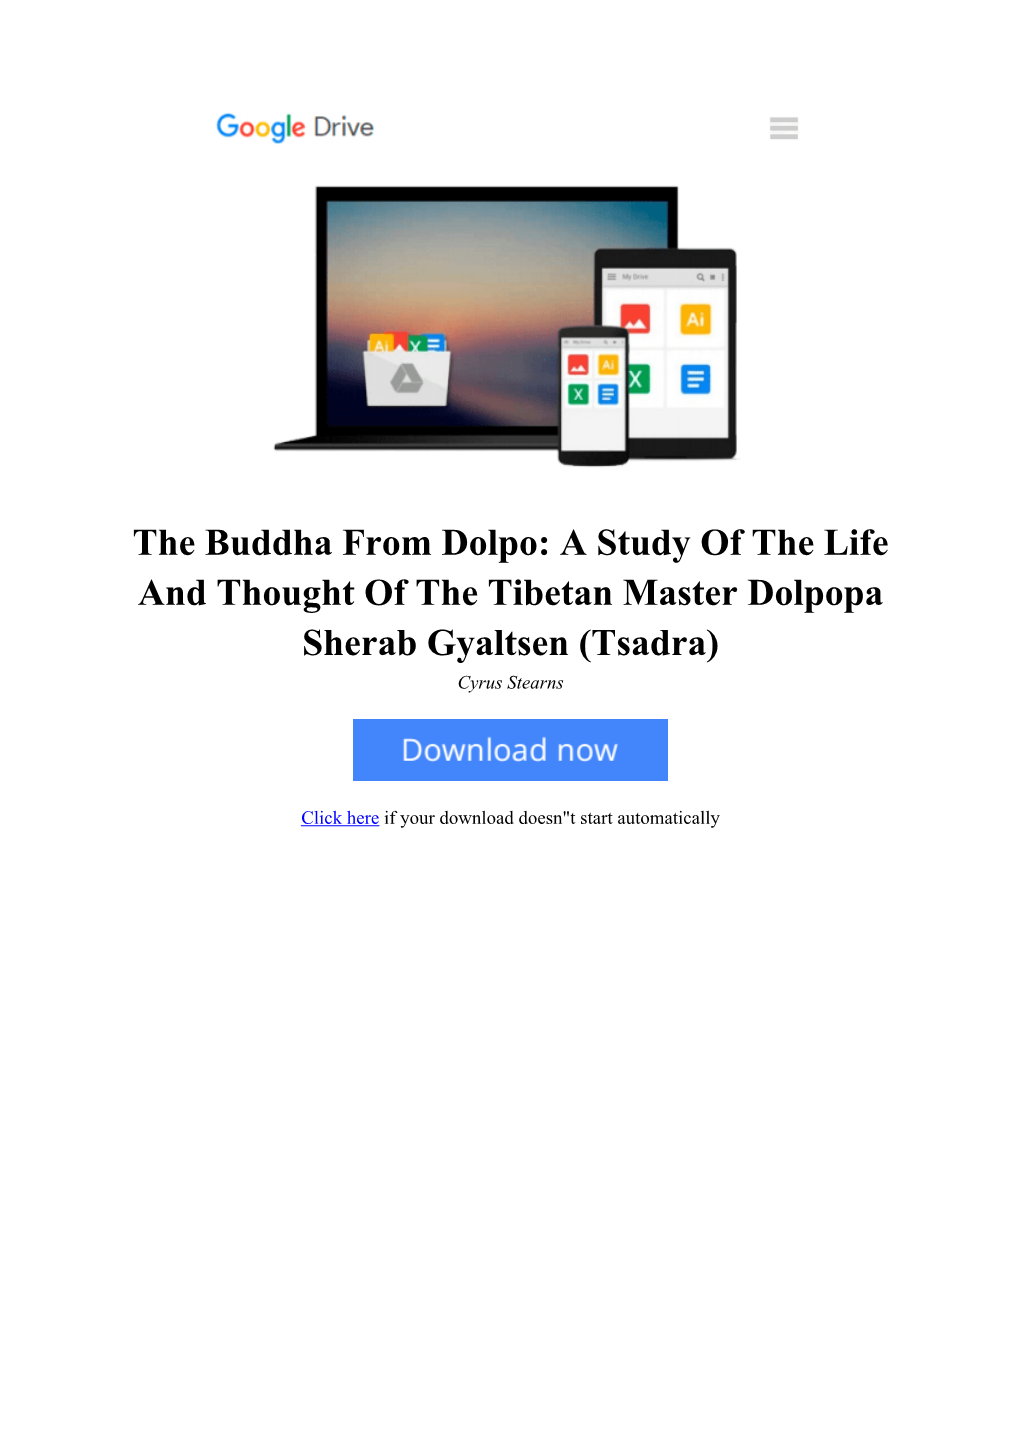 [NEOR]⋙ the Buddha from Dolpo: a Study of the Life and Thought Of